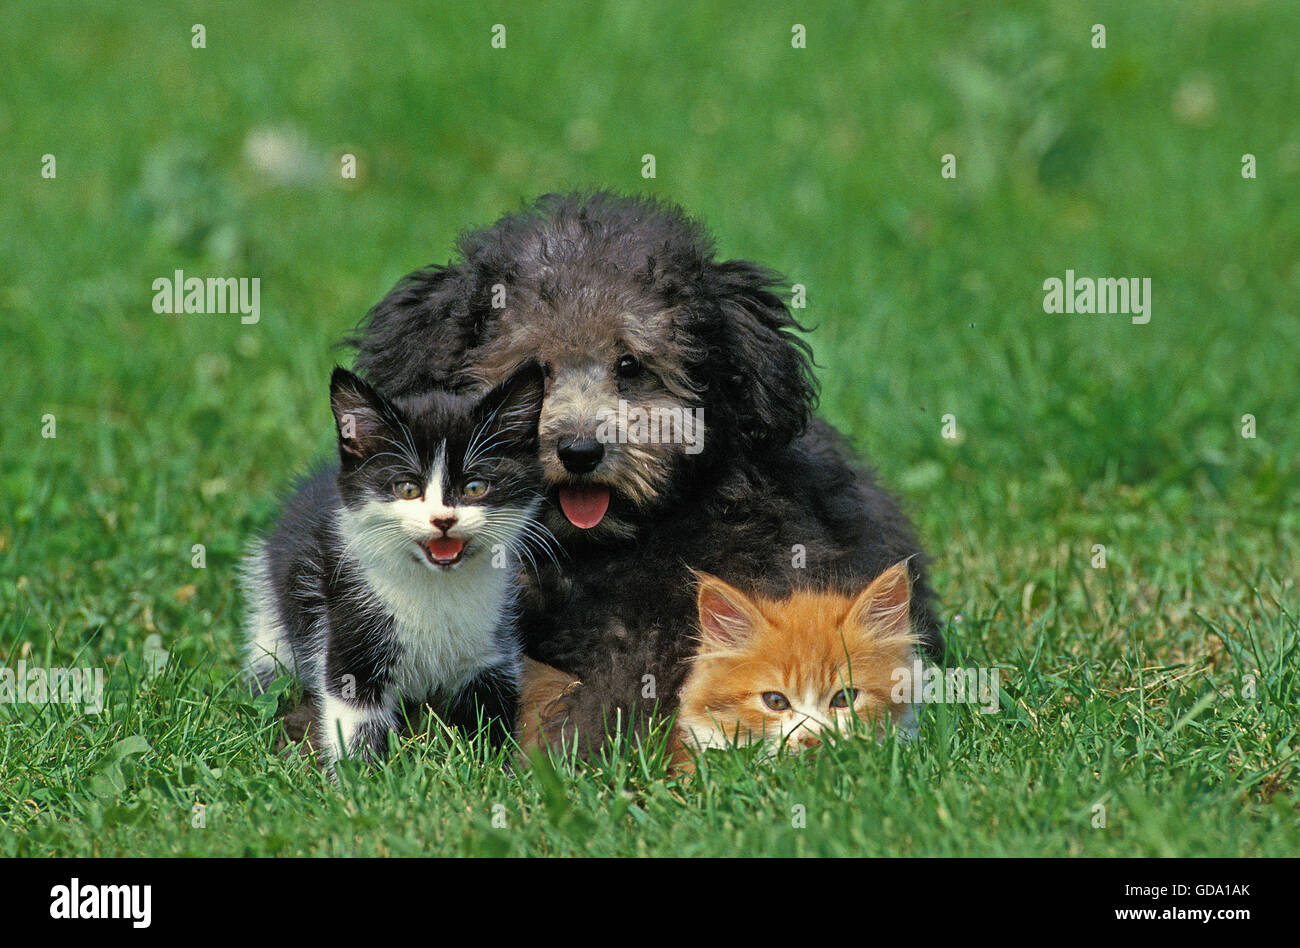 Grey Miniature Poodle Pup with Kittens on Grass Stock Photo